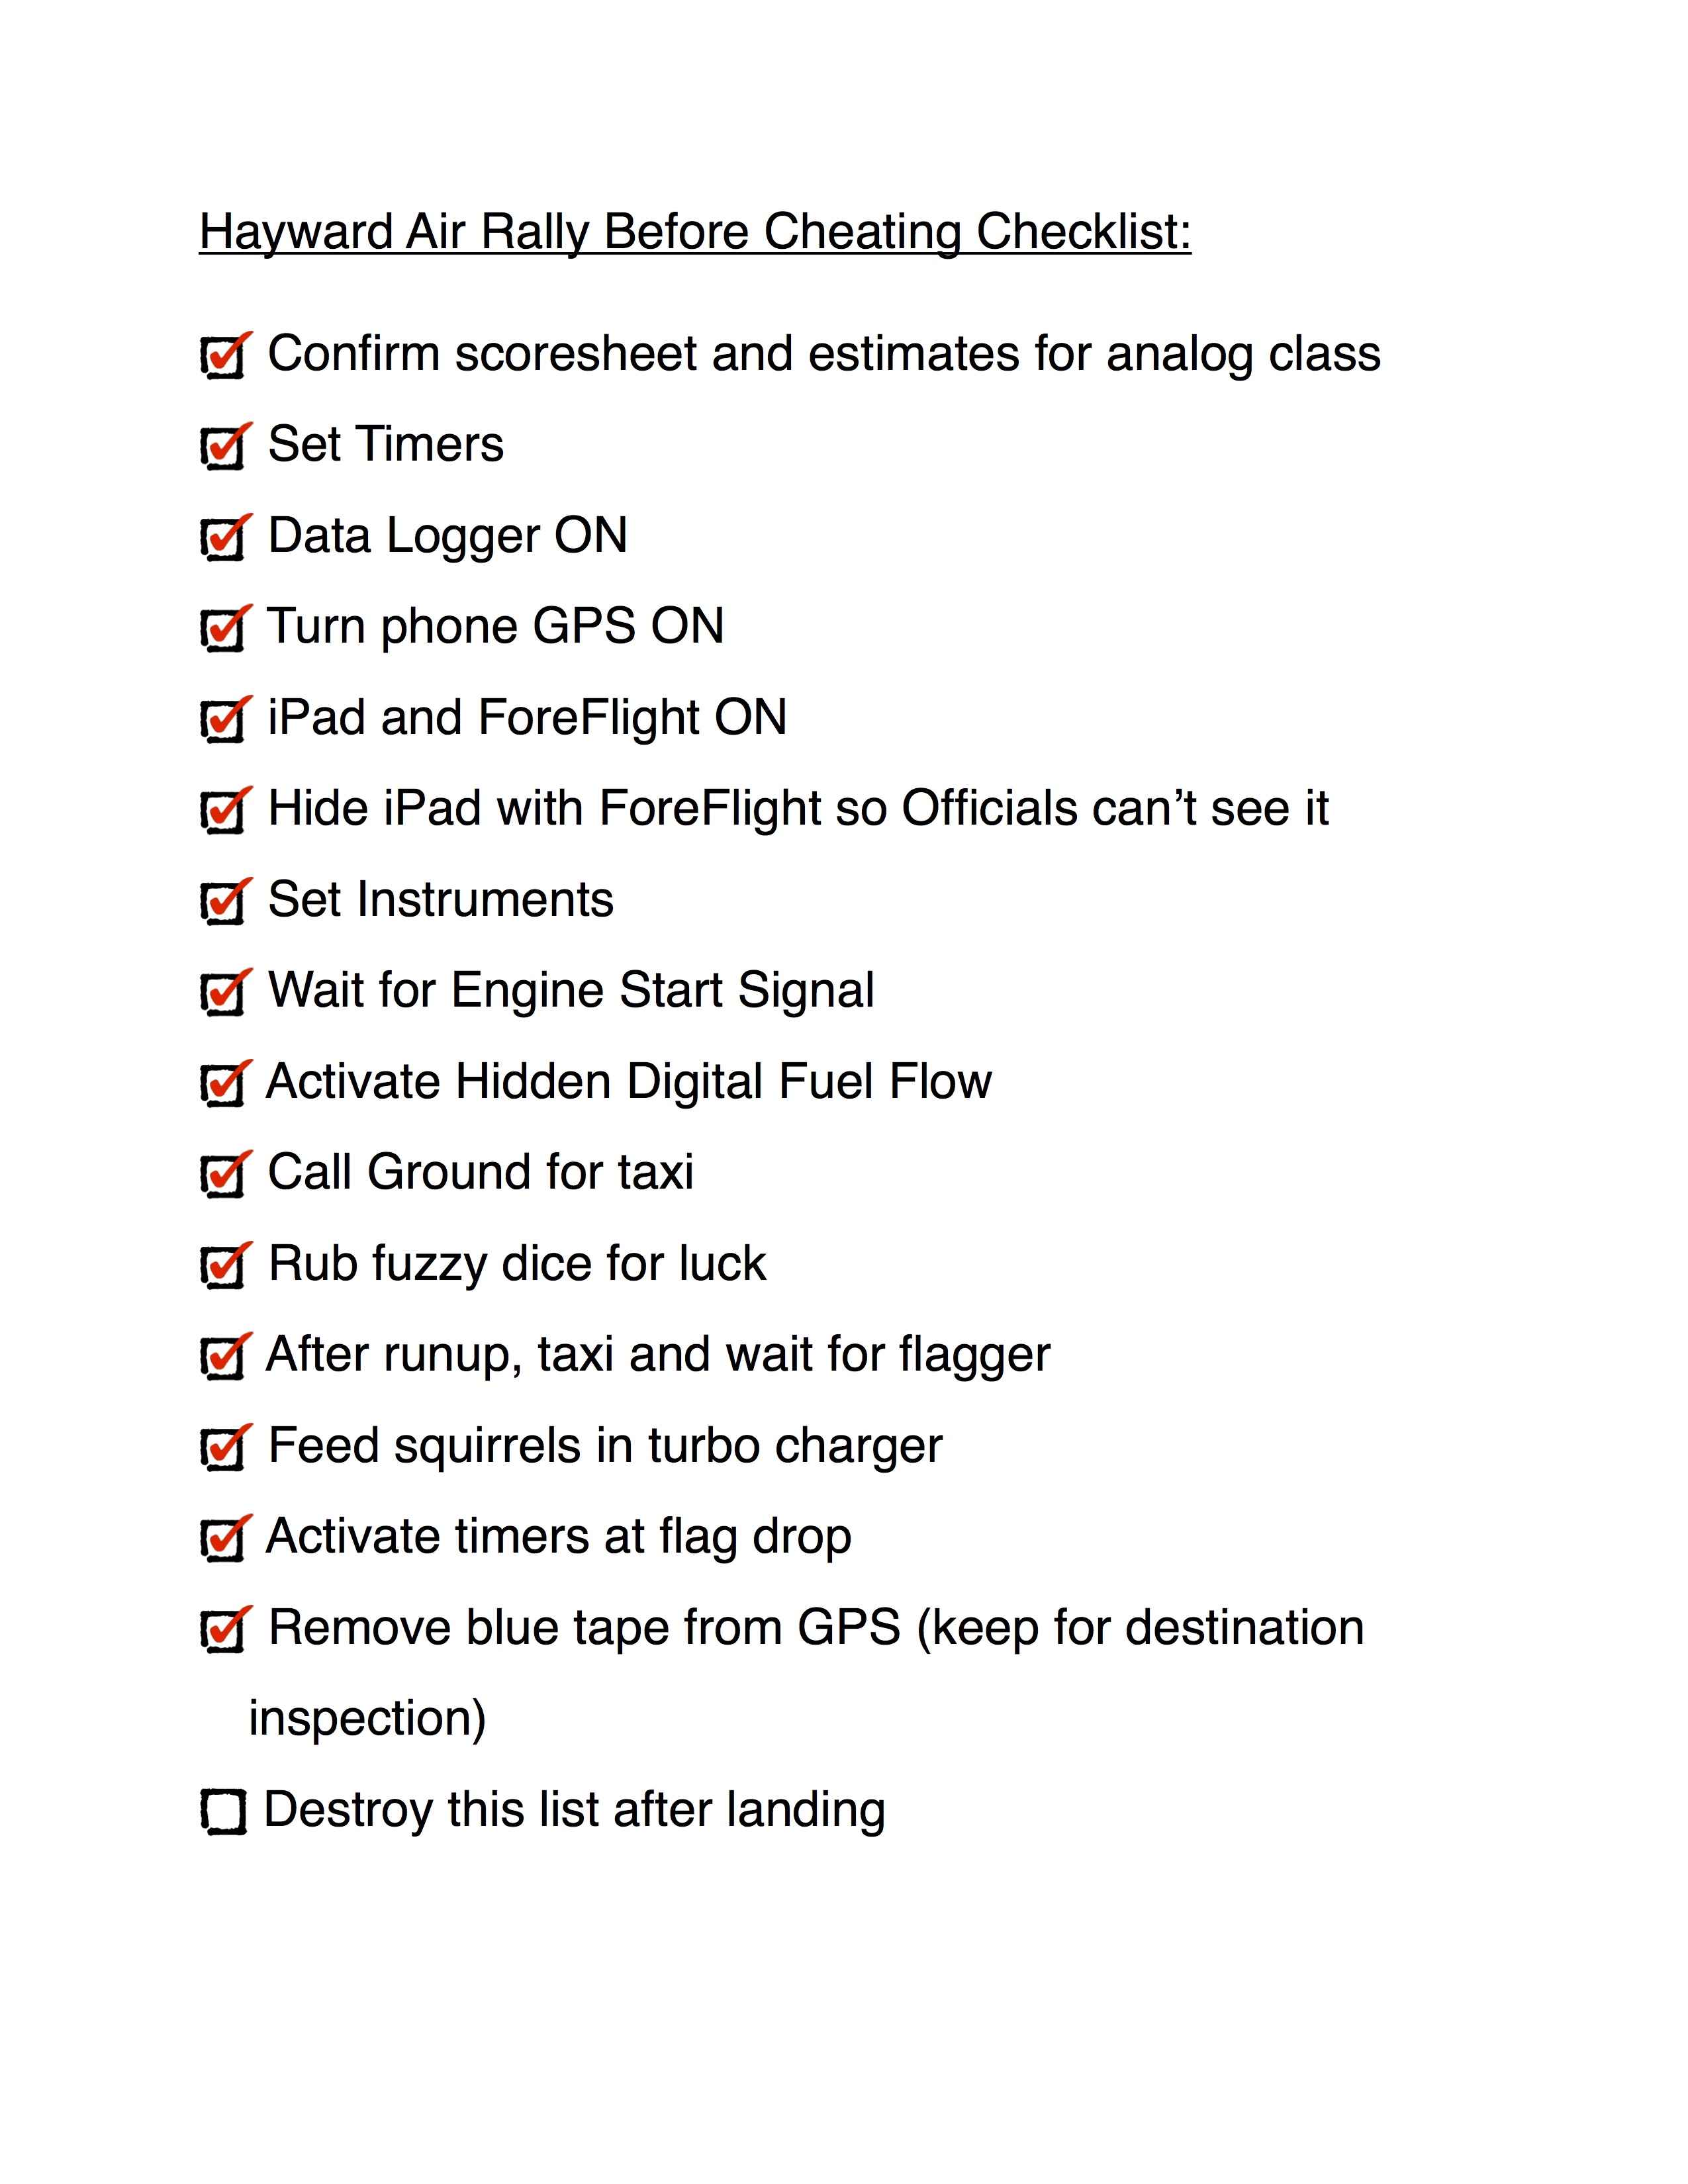 Before Cheating
            Checklist